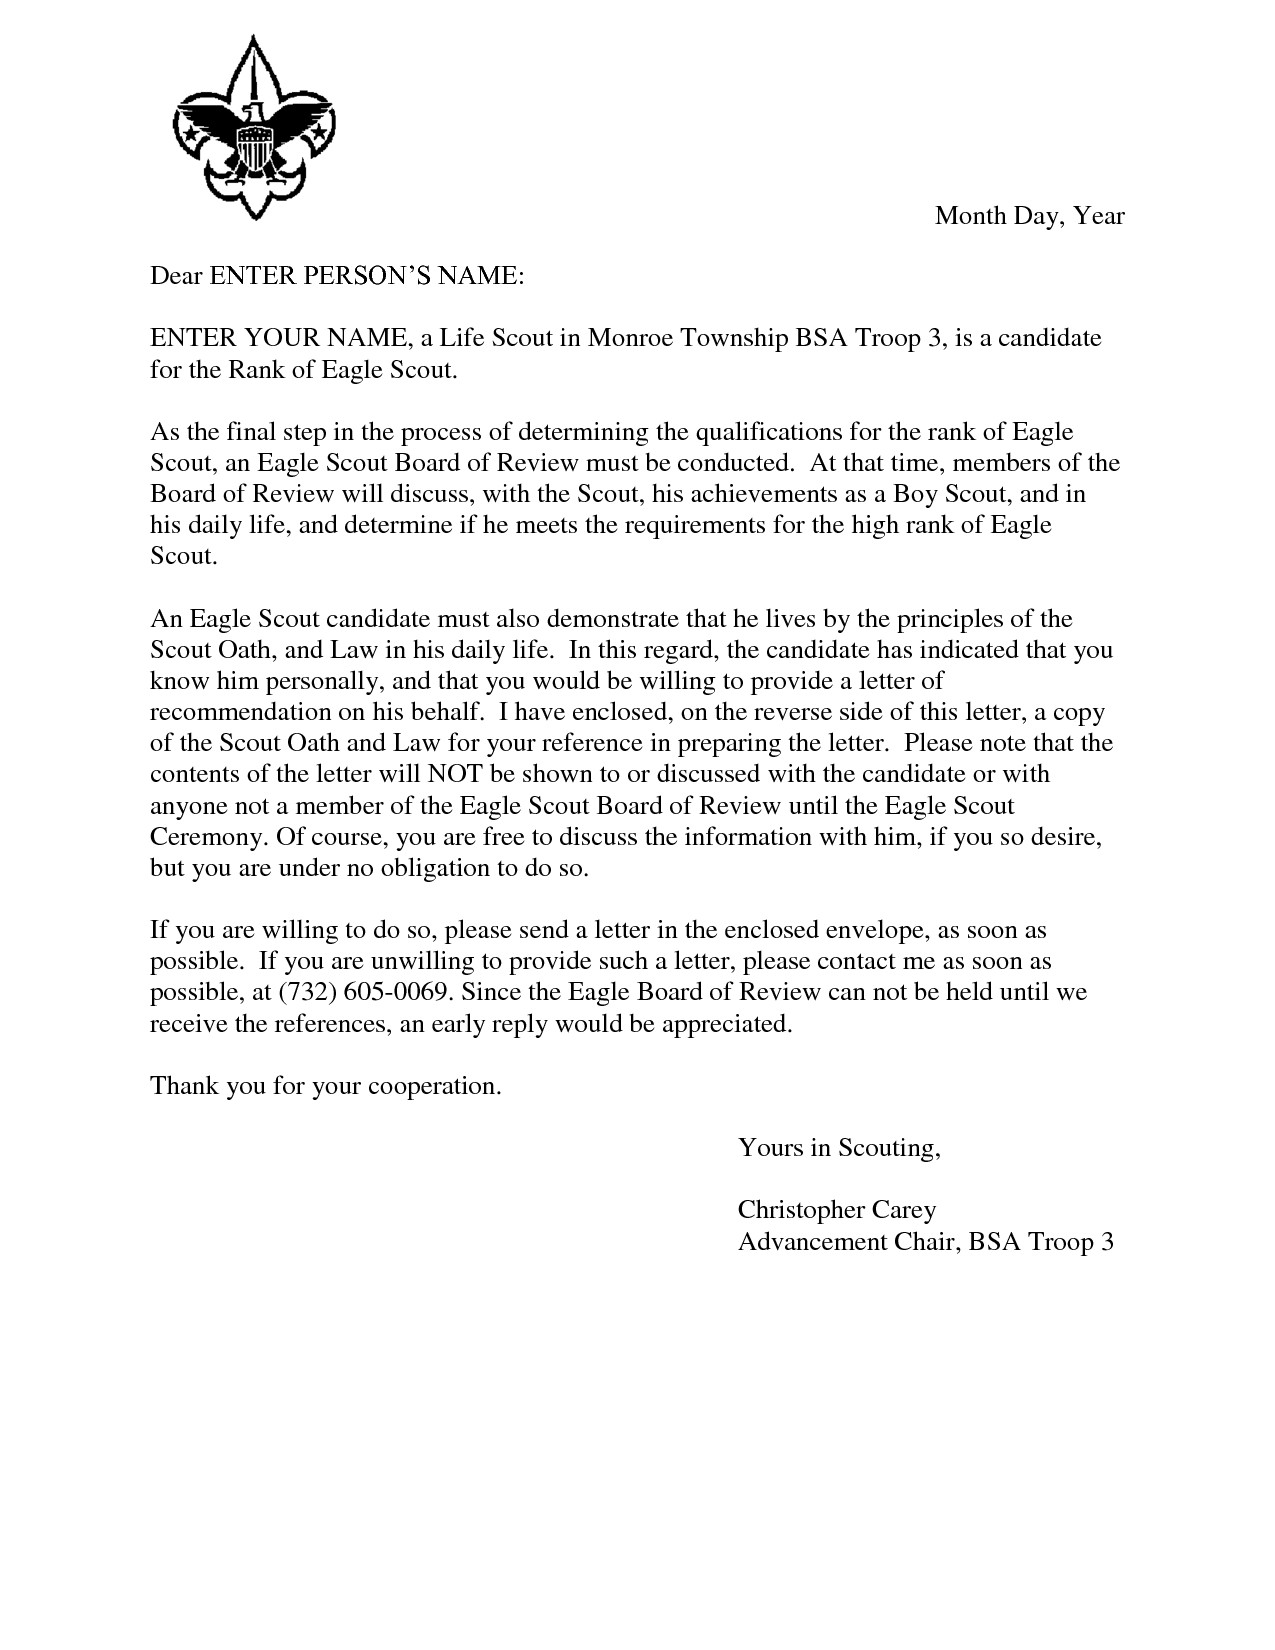 Letter to soldiers Template Letter to Troops Template Examples